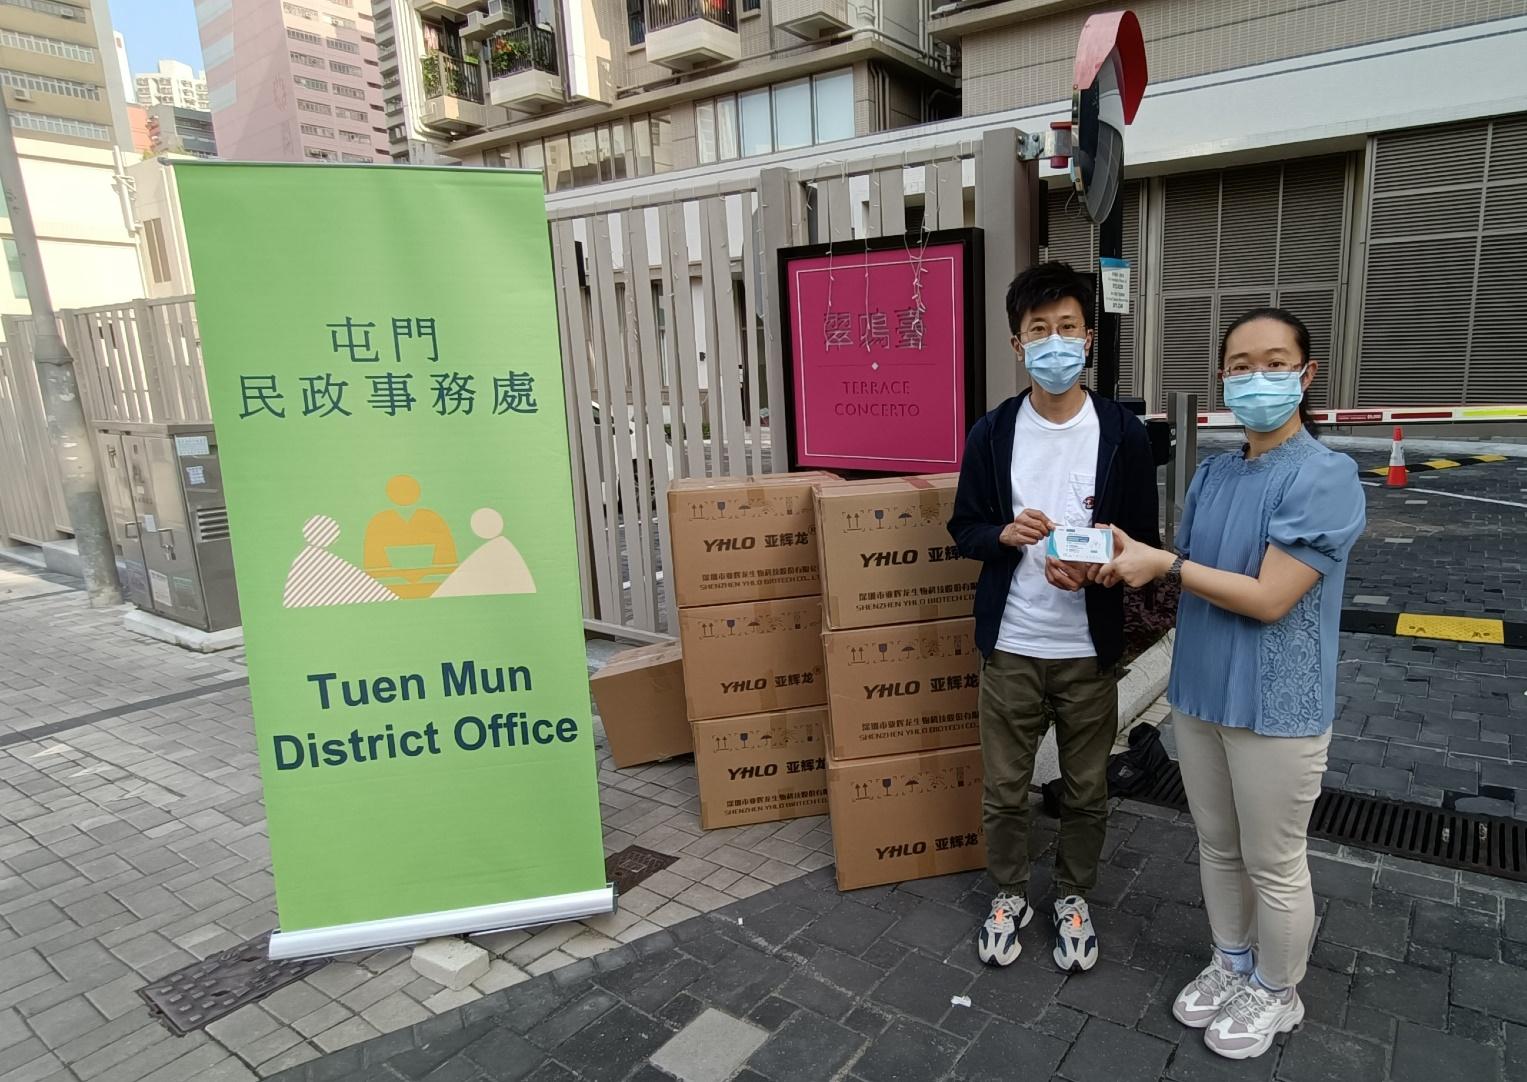 The Tuen Mun District Office today (May 18) distributed COVID-19 rapid test kits to households, cleansing workers and property management staff living and working in Terrace Concerto for voluntary testing through the property management company.